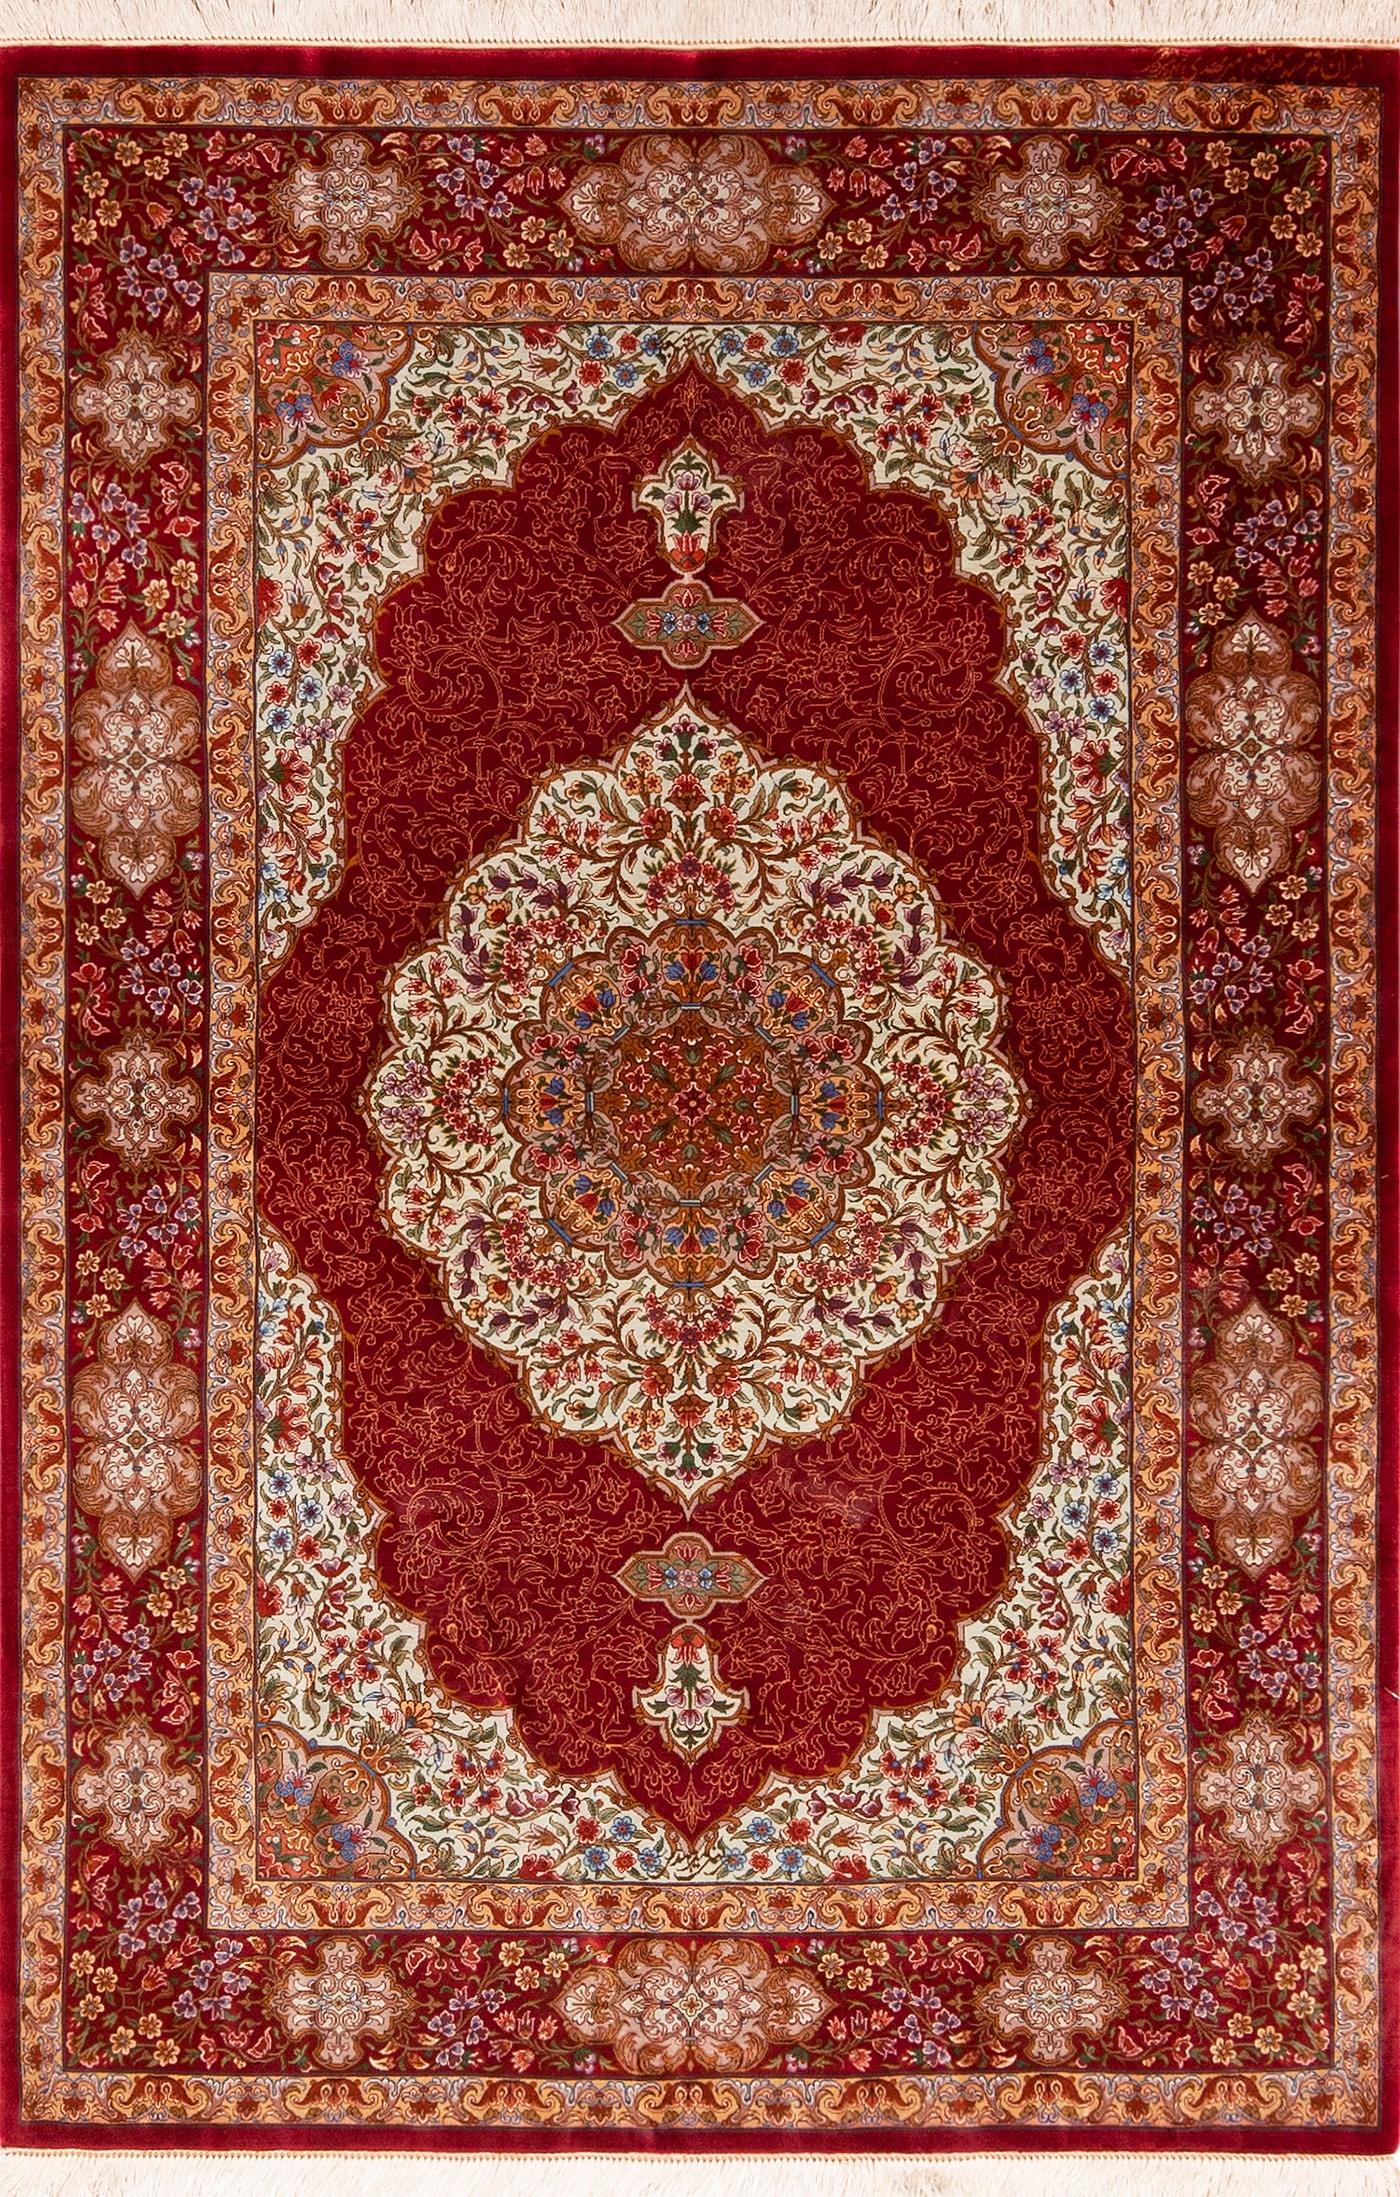 Fine Floral Small Luxurious Vintage Persian Silk Qum Rug, country of origin: Persian Rugs, Circa date: Vintage